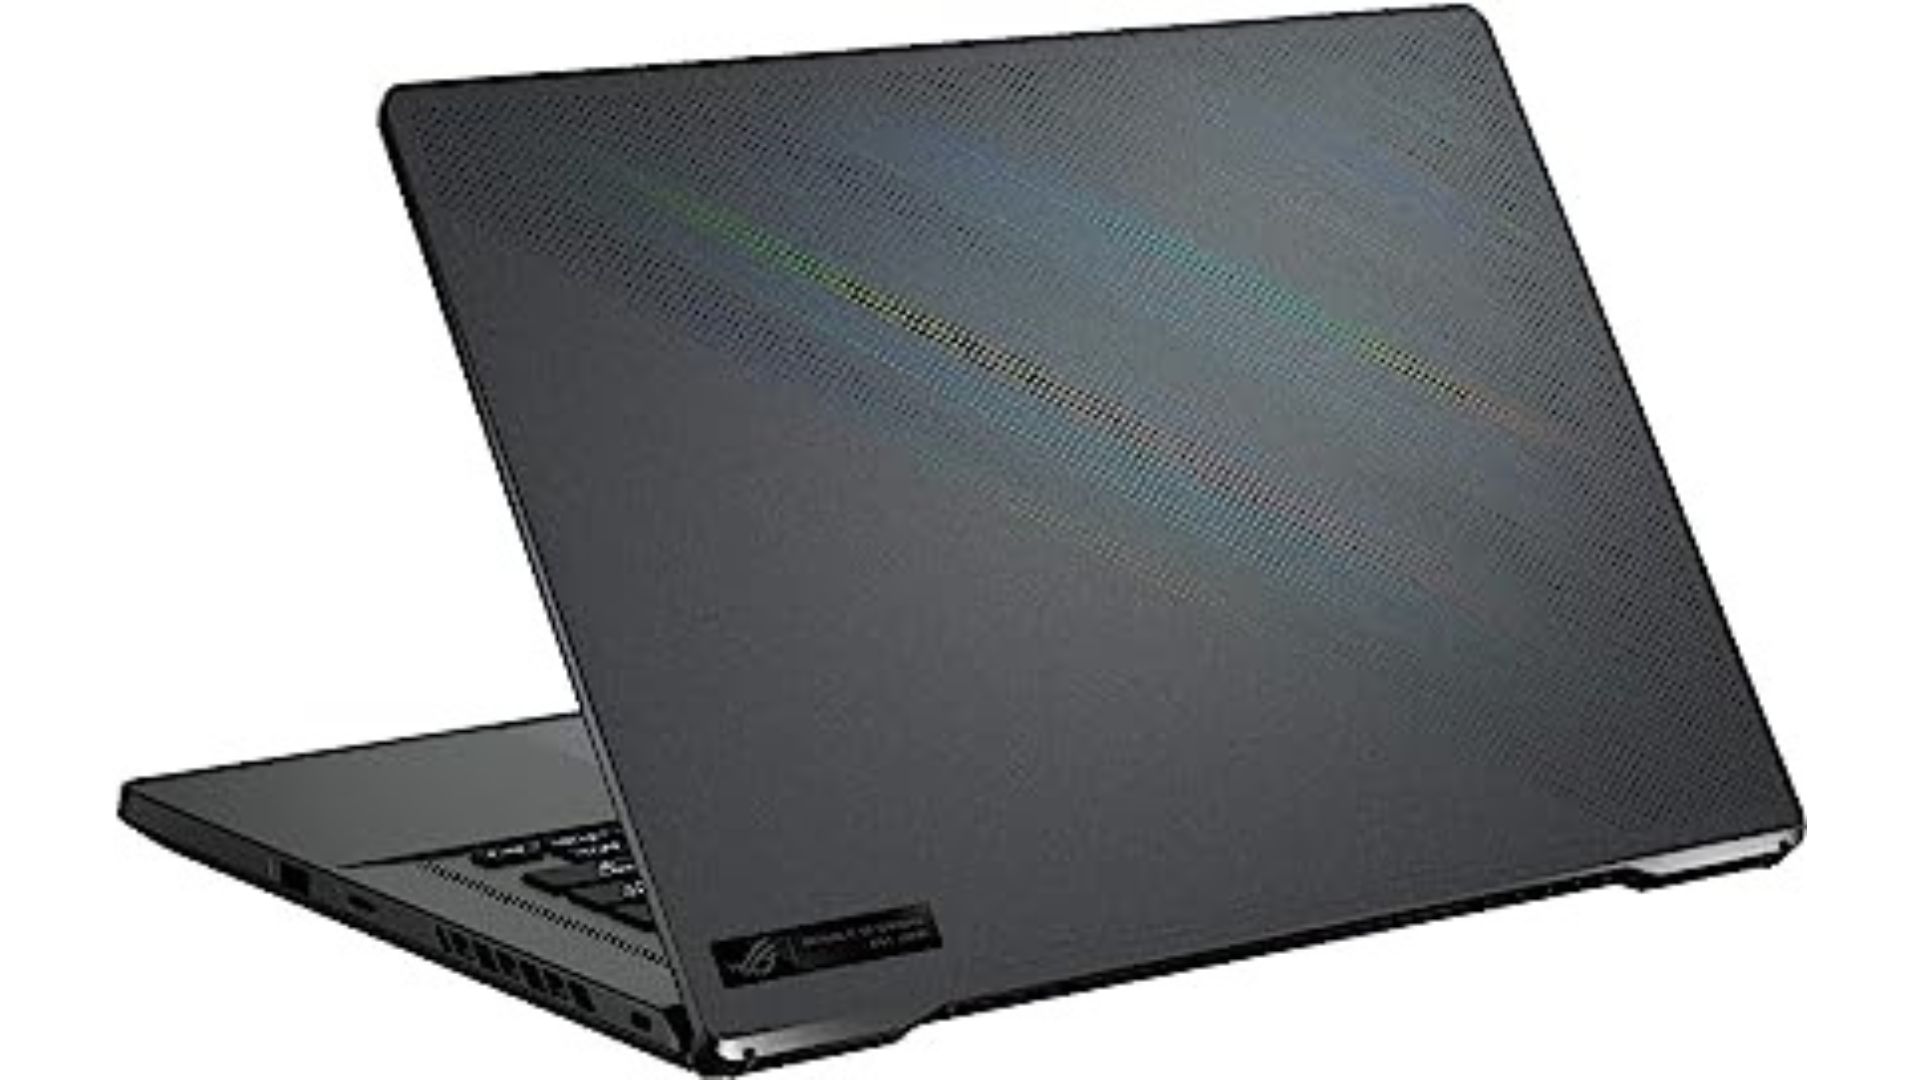 ASUS ROG FX503: A Professional Gaming Laptop